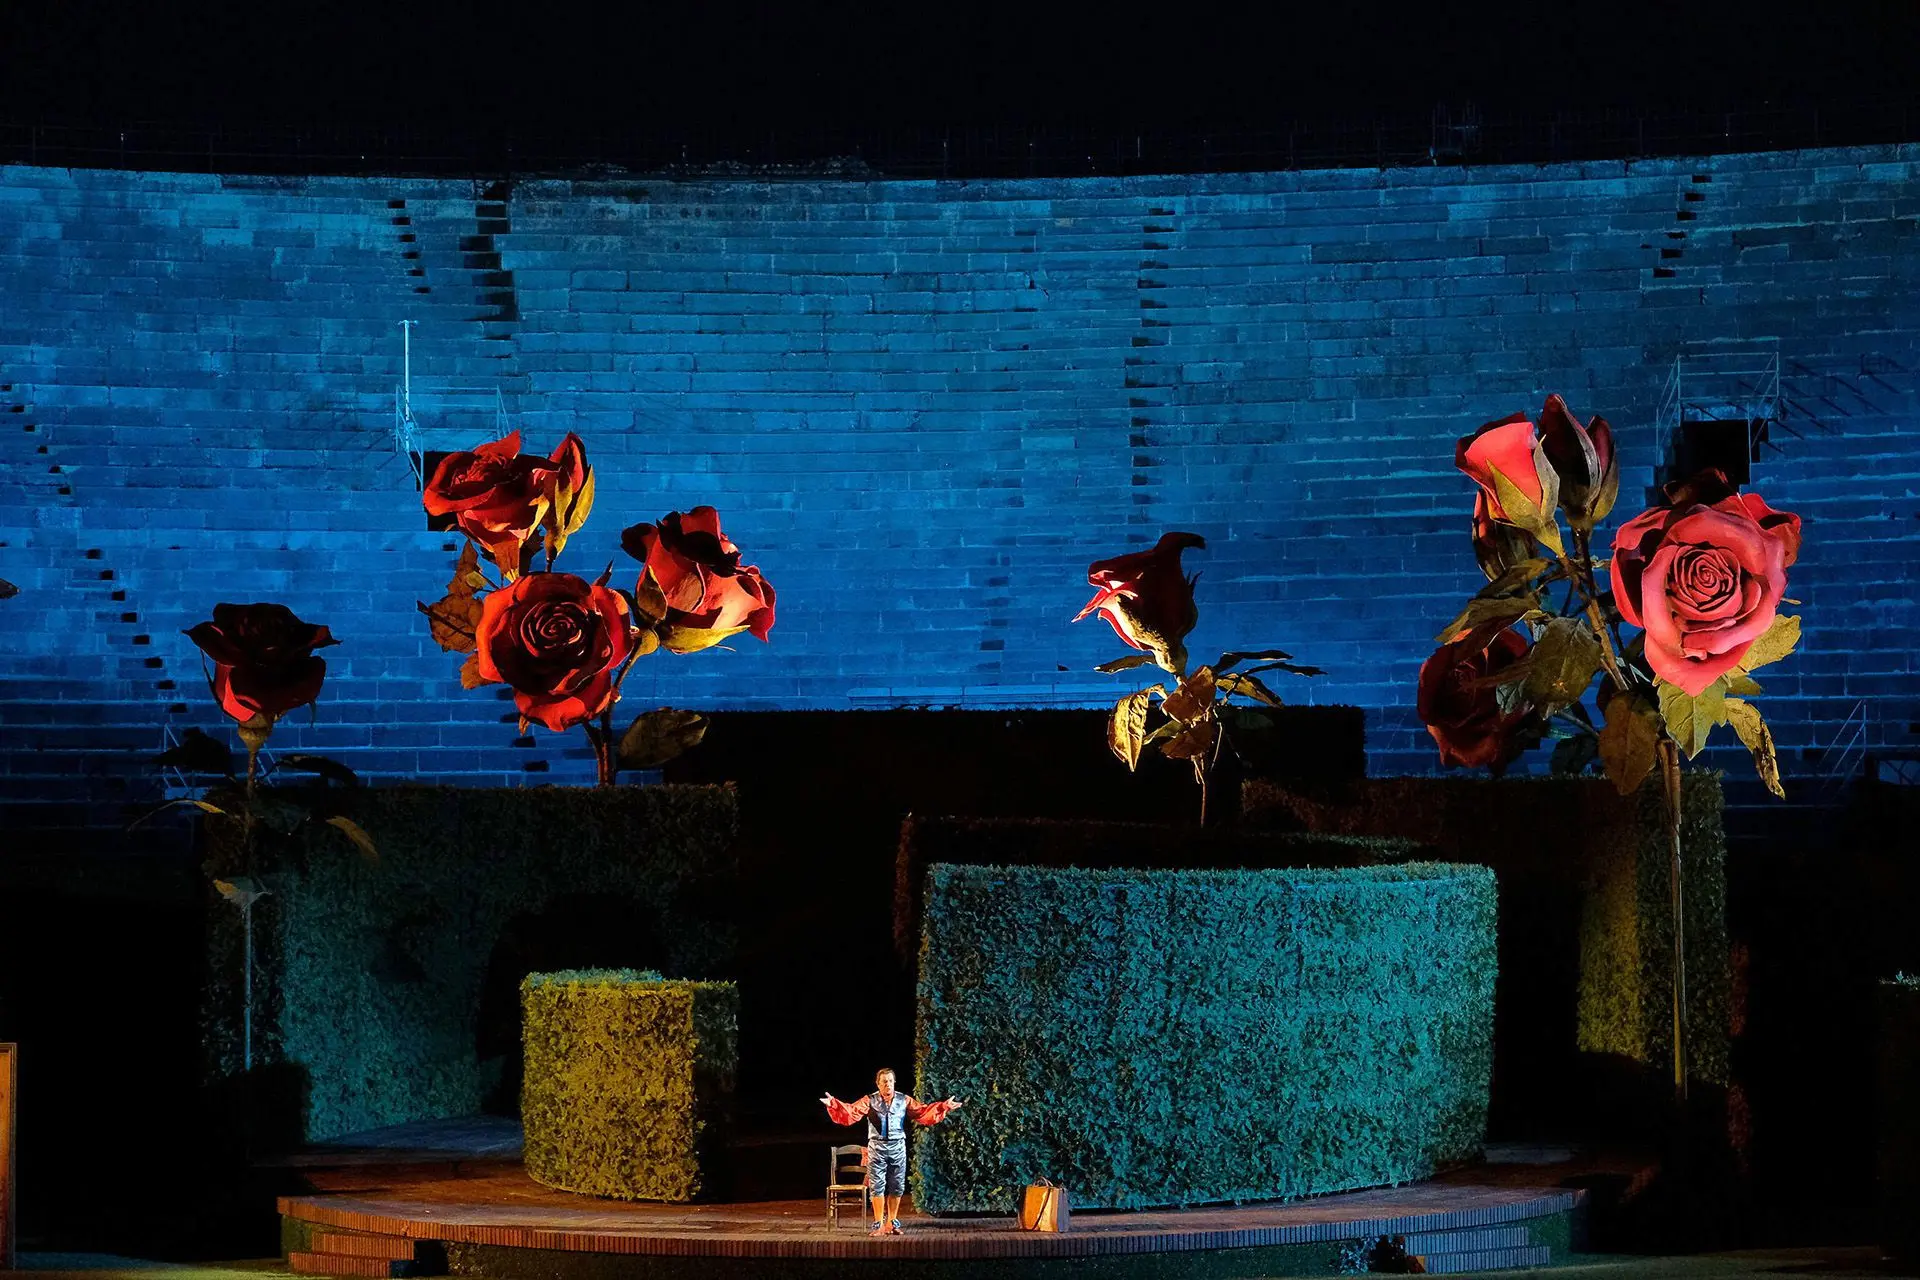 The stage is dominated by a part of a circular labyrinth of concentric semicircles that vary in height. The semicircles are made up of enormous green hedges set upon a raised circular base. They are surrounded by 8 giant red roses made out of papier-mâché. The roses have long green stems coming up from the floor of the stage with leaves of the same color. Figaro is in front of the labyrinth at center stage. Behind him is a wooden chair with a straw seat. To his left is a piece luggage on the ground. Given the colossal dimensions of the labyrinth and the roses, Figaro appears to be minute in comparison.